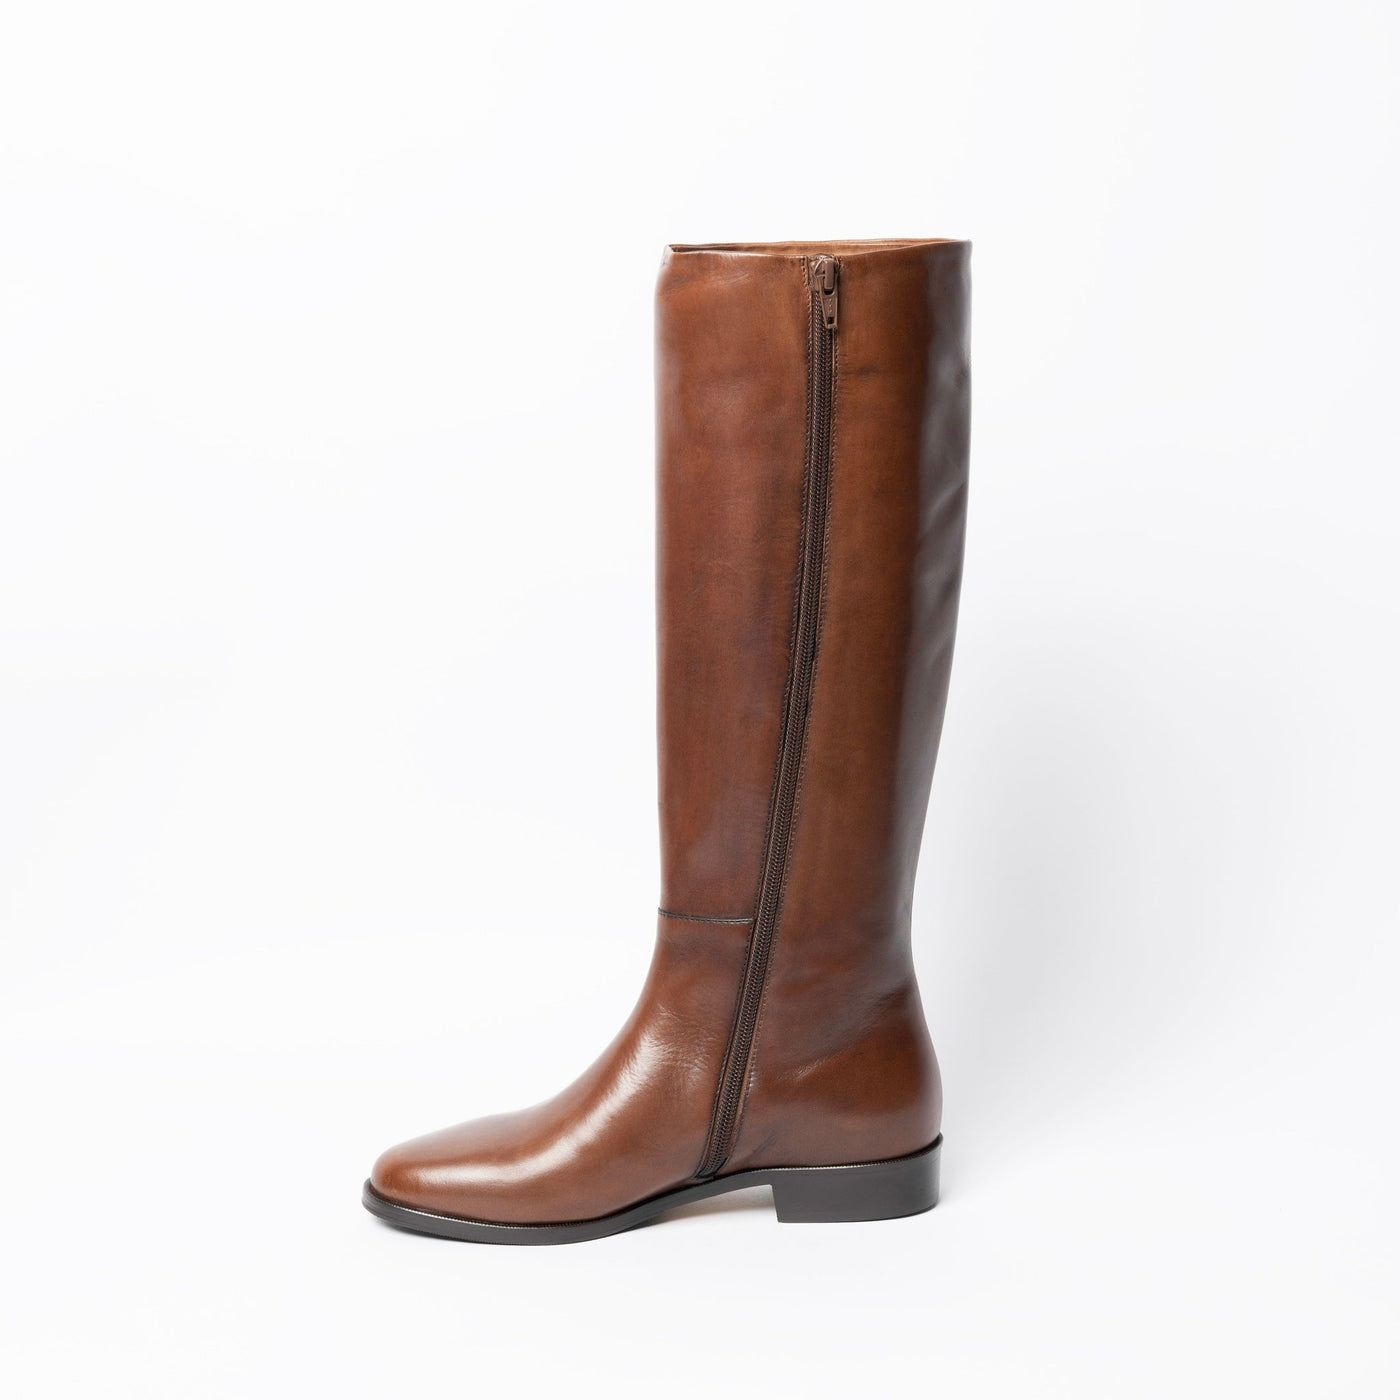 Women's brown leather riding boot. 